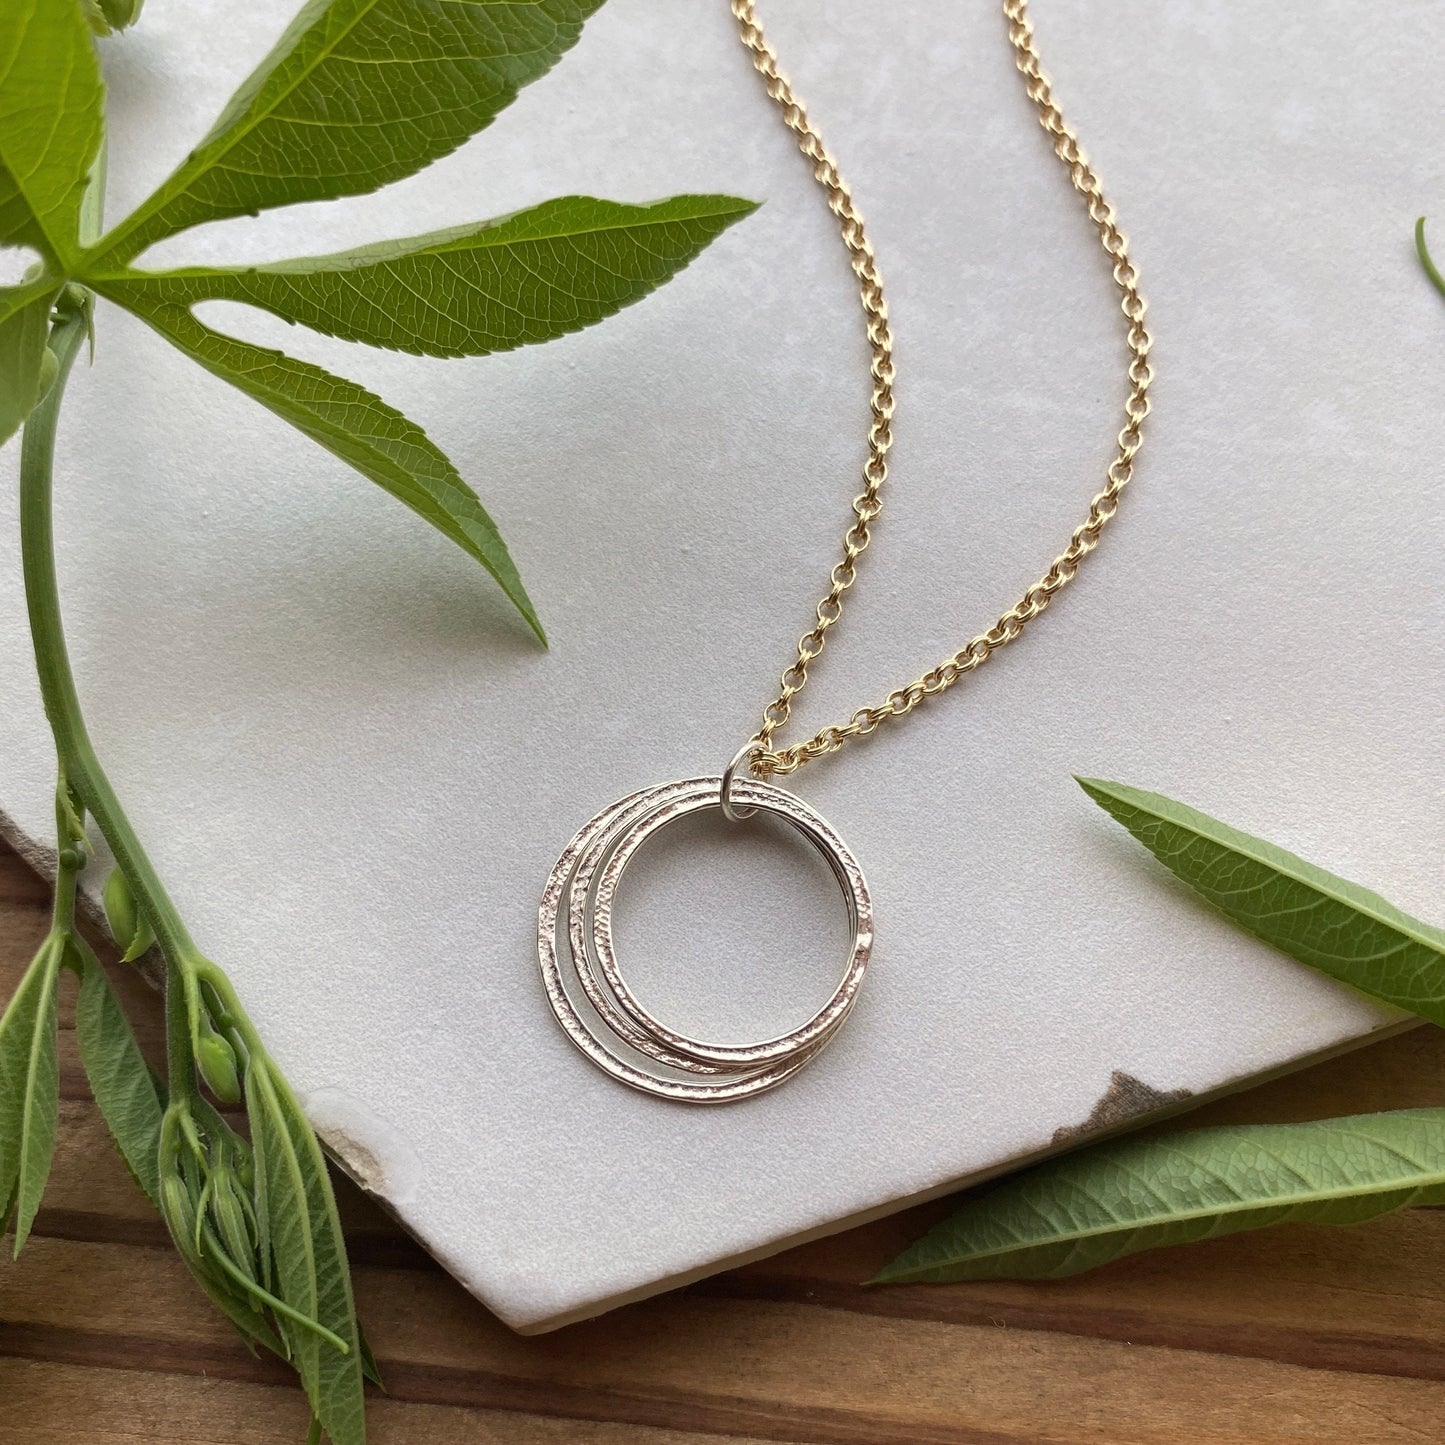 30th Mixed Metal Mid Size Milestone Birthday Necklace, Handcrafted Perfectly Imperfect Sterling Silver Sparkly Circles Pendant on Gold Chain